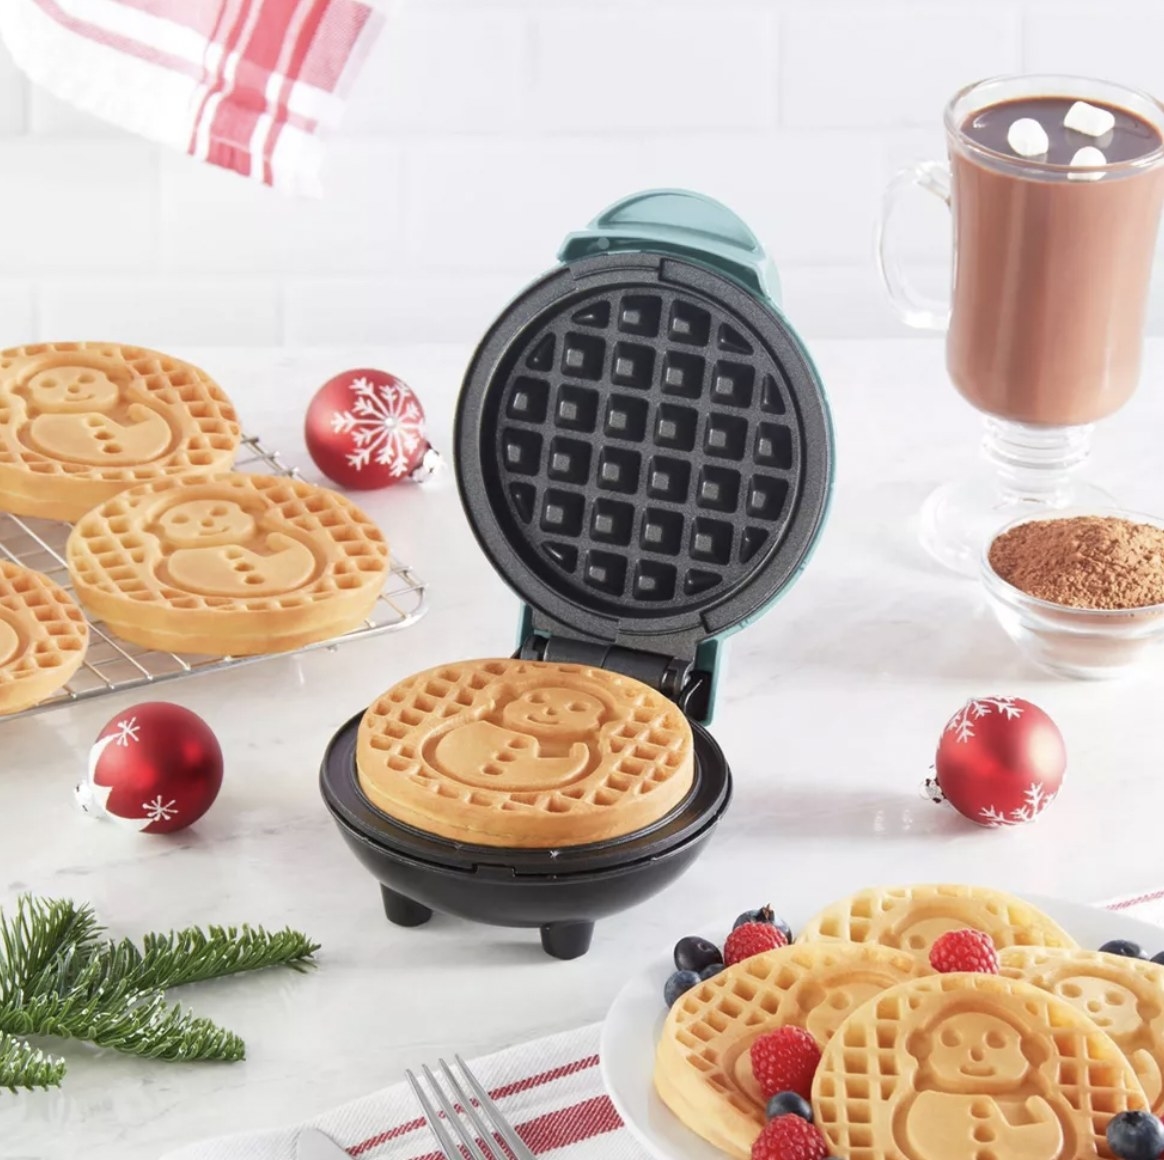 The waffle maker with snowman waffle